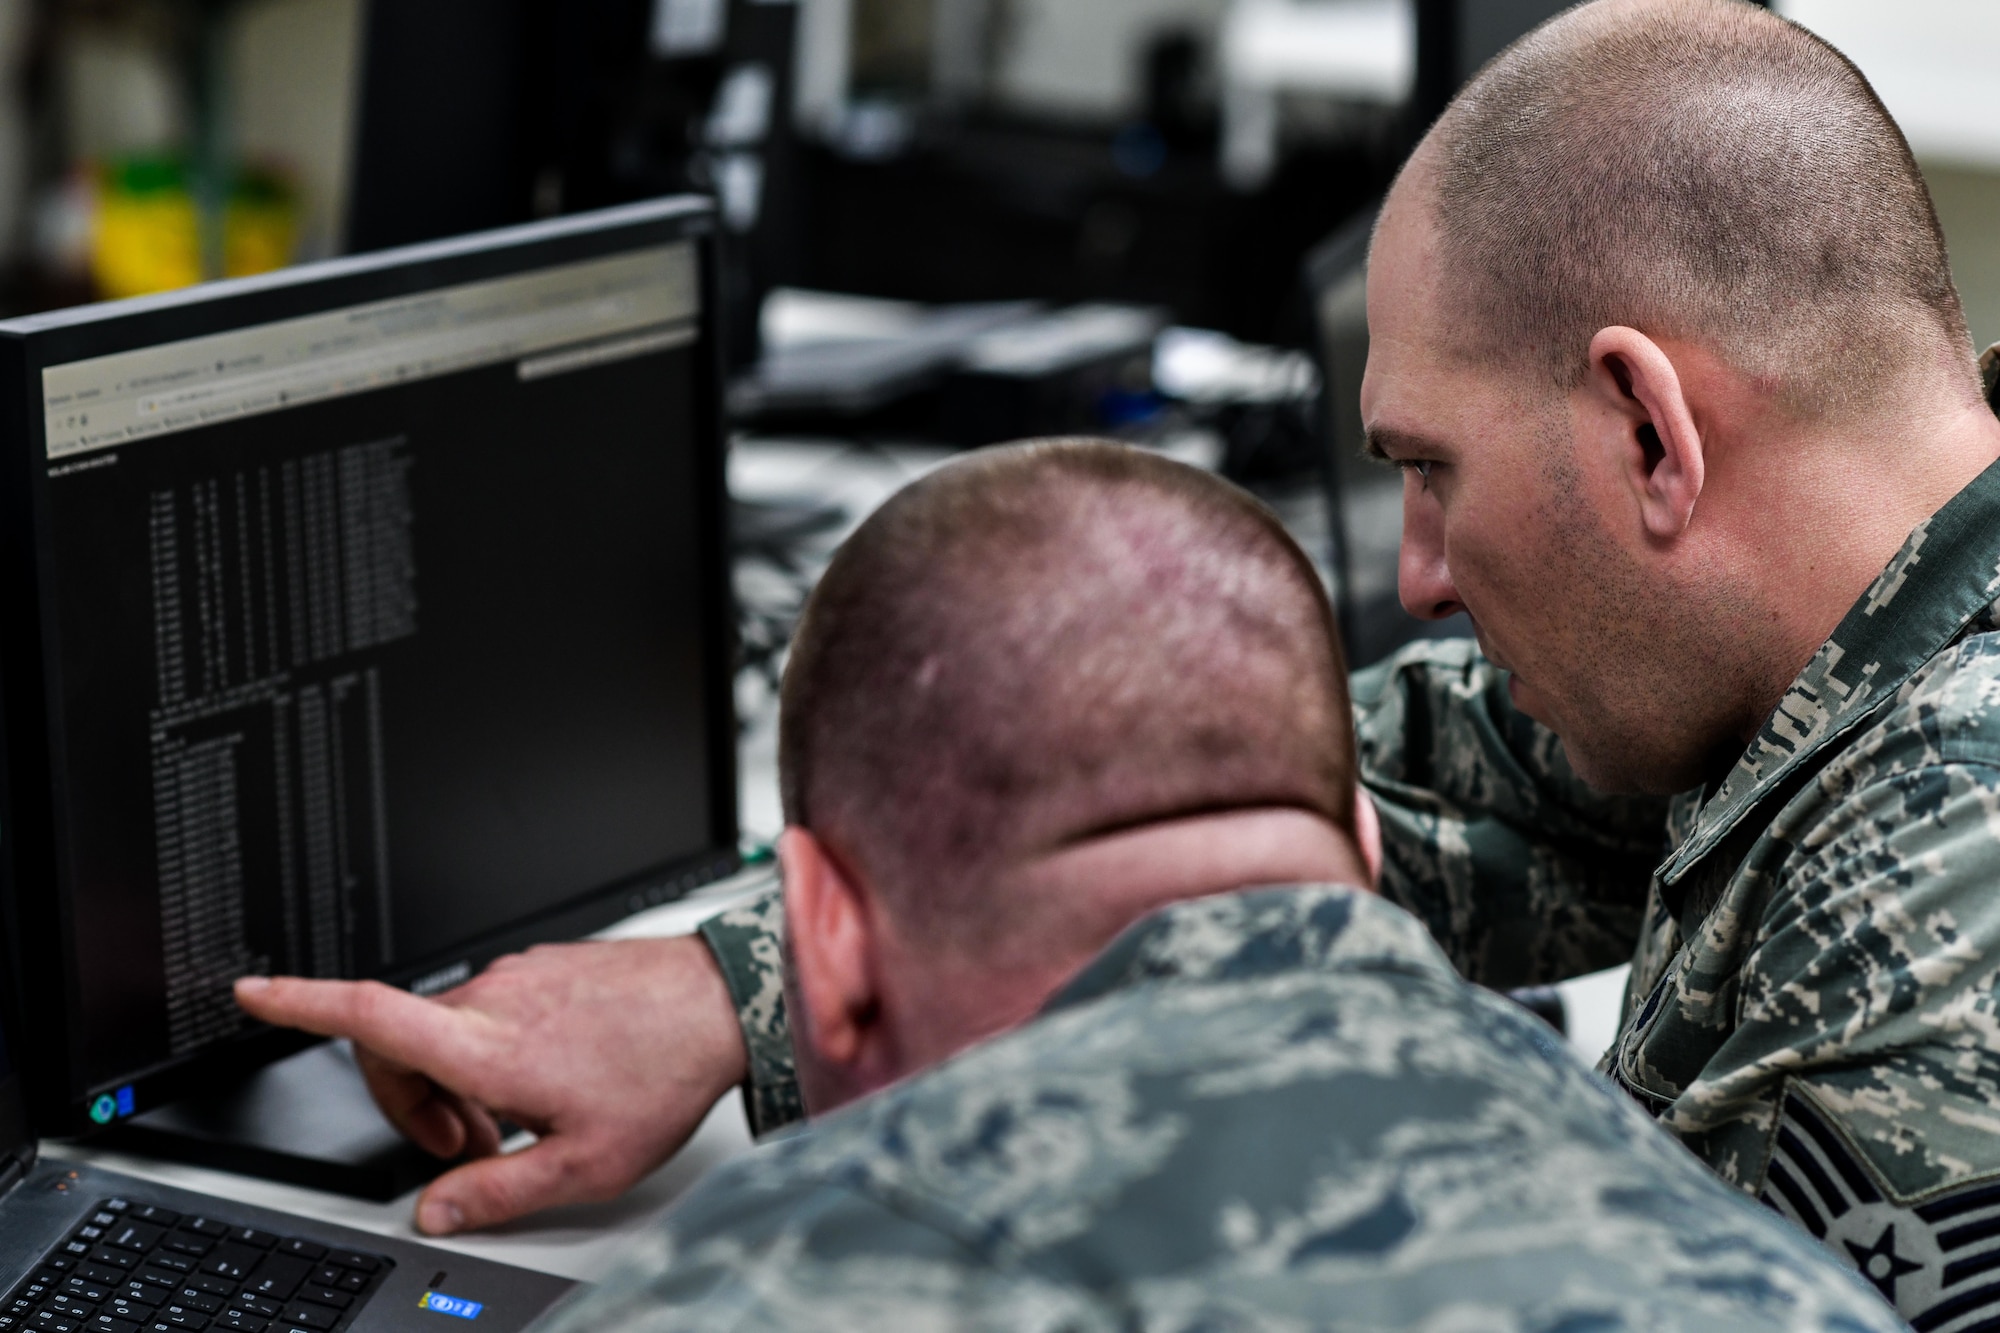 Tech Sgt. Scott Ranostay, a cyber systems operator, and Tech Sgt. Lawrence Mulder, a communications computer systems operator, both assigned to the 910th Communications Squadron, troubleshoot their lab environment with a Cyber Vulnerability Assessment Hunt weapon system, Jan. 11, 2019, at Youngstown Air Reserve Station.